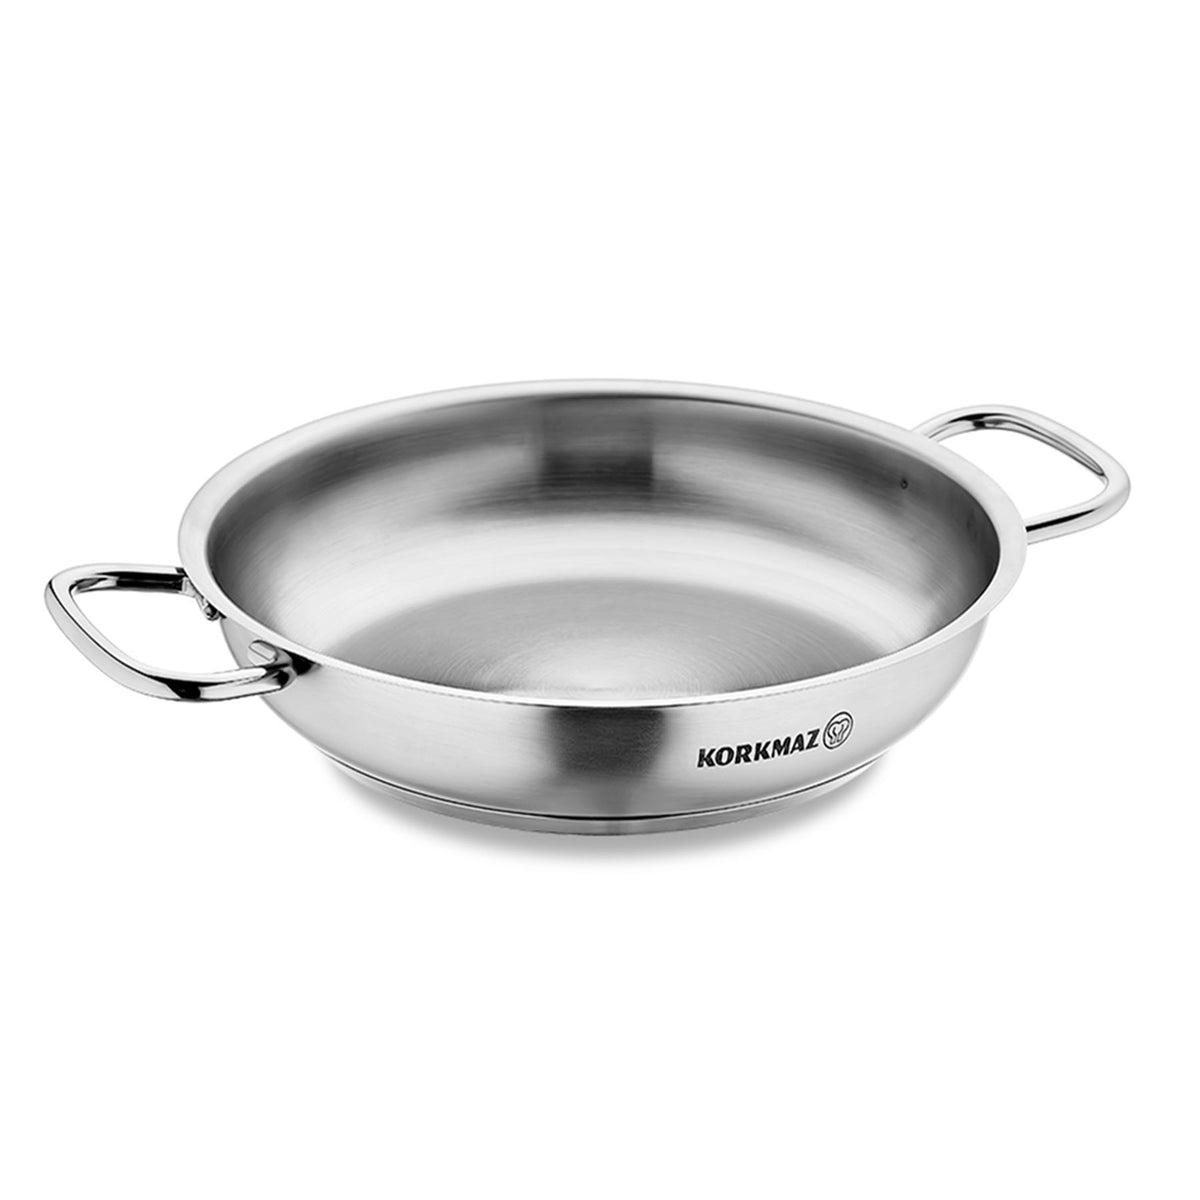 Proline Frypan with handles , Silver